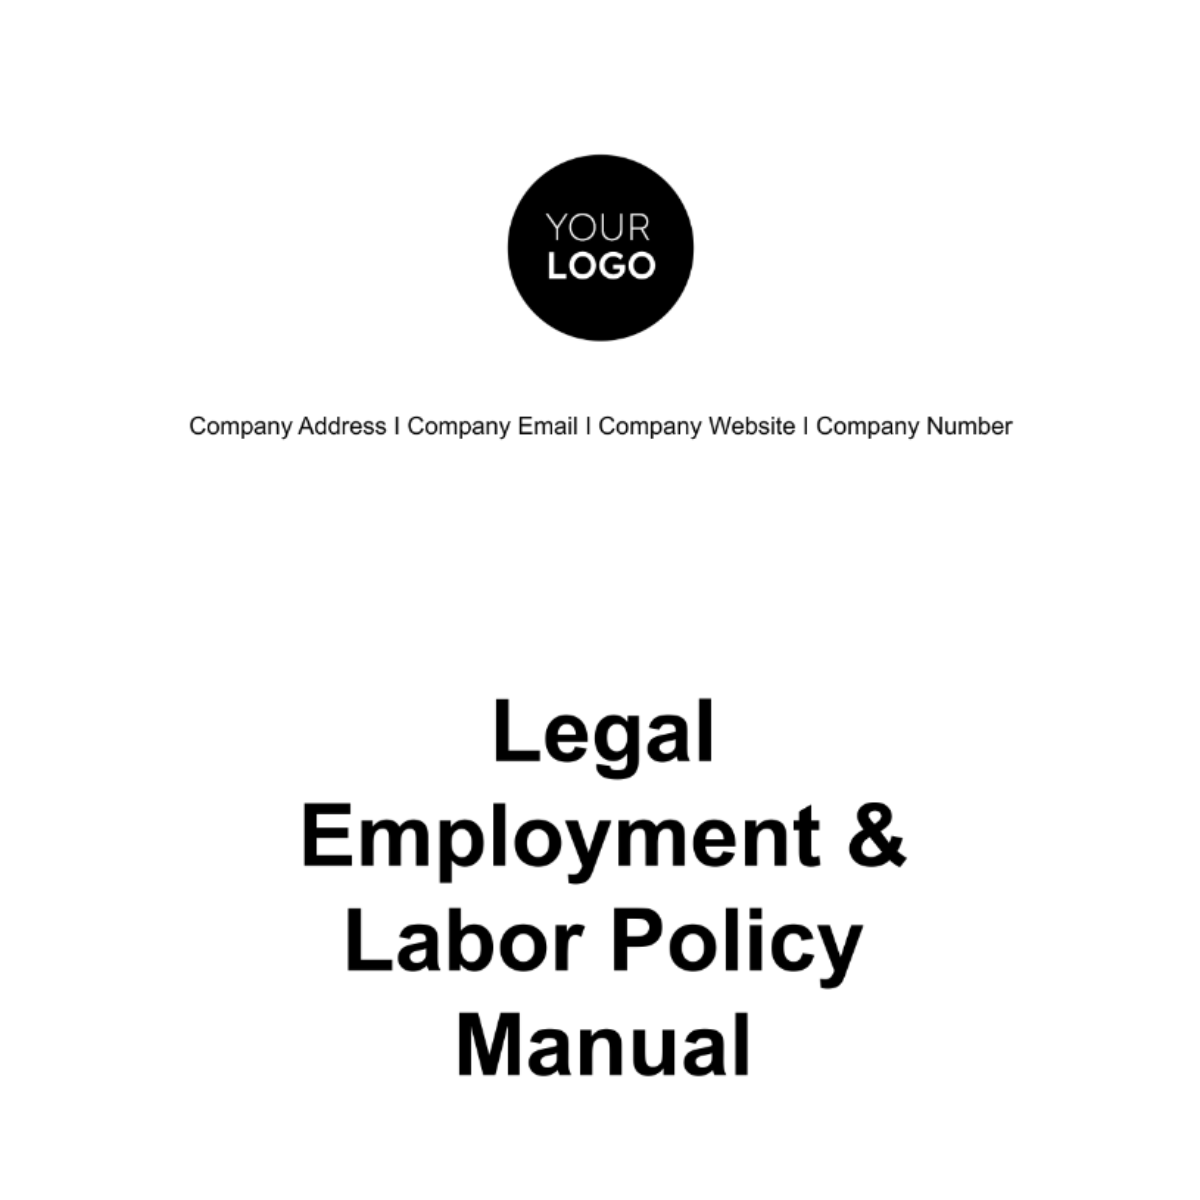 Free Legal Employment & Labor Policy Manual Template